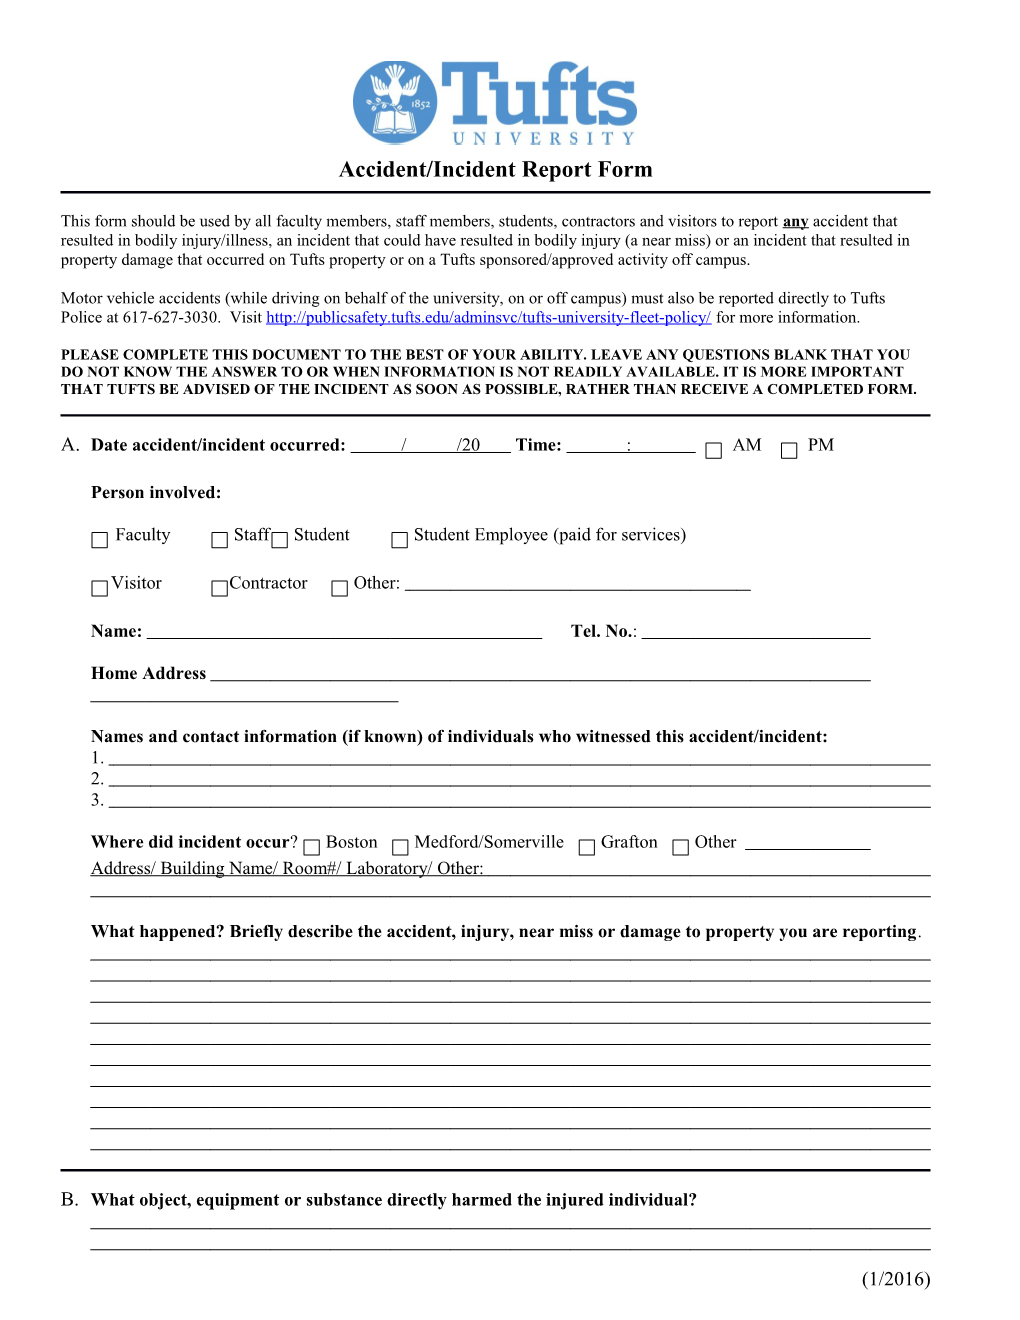 Tufts University Accident/Incident Report Form 1